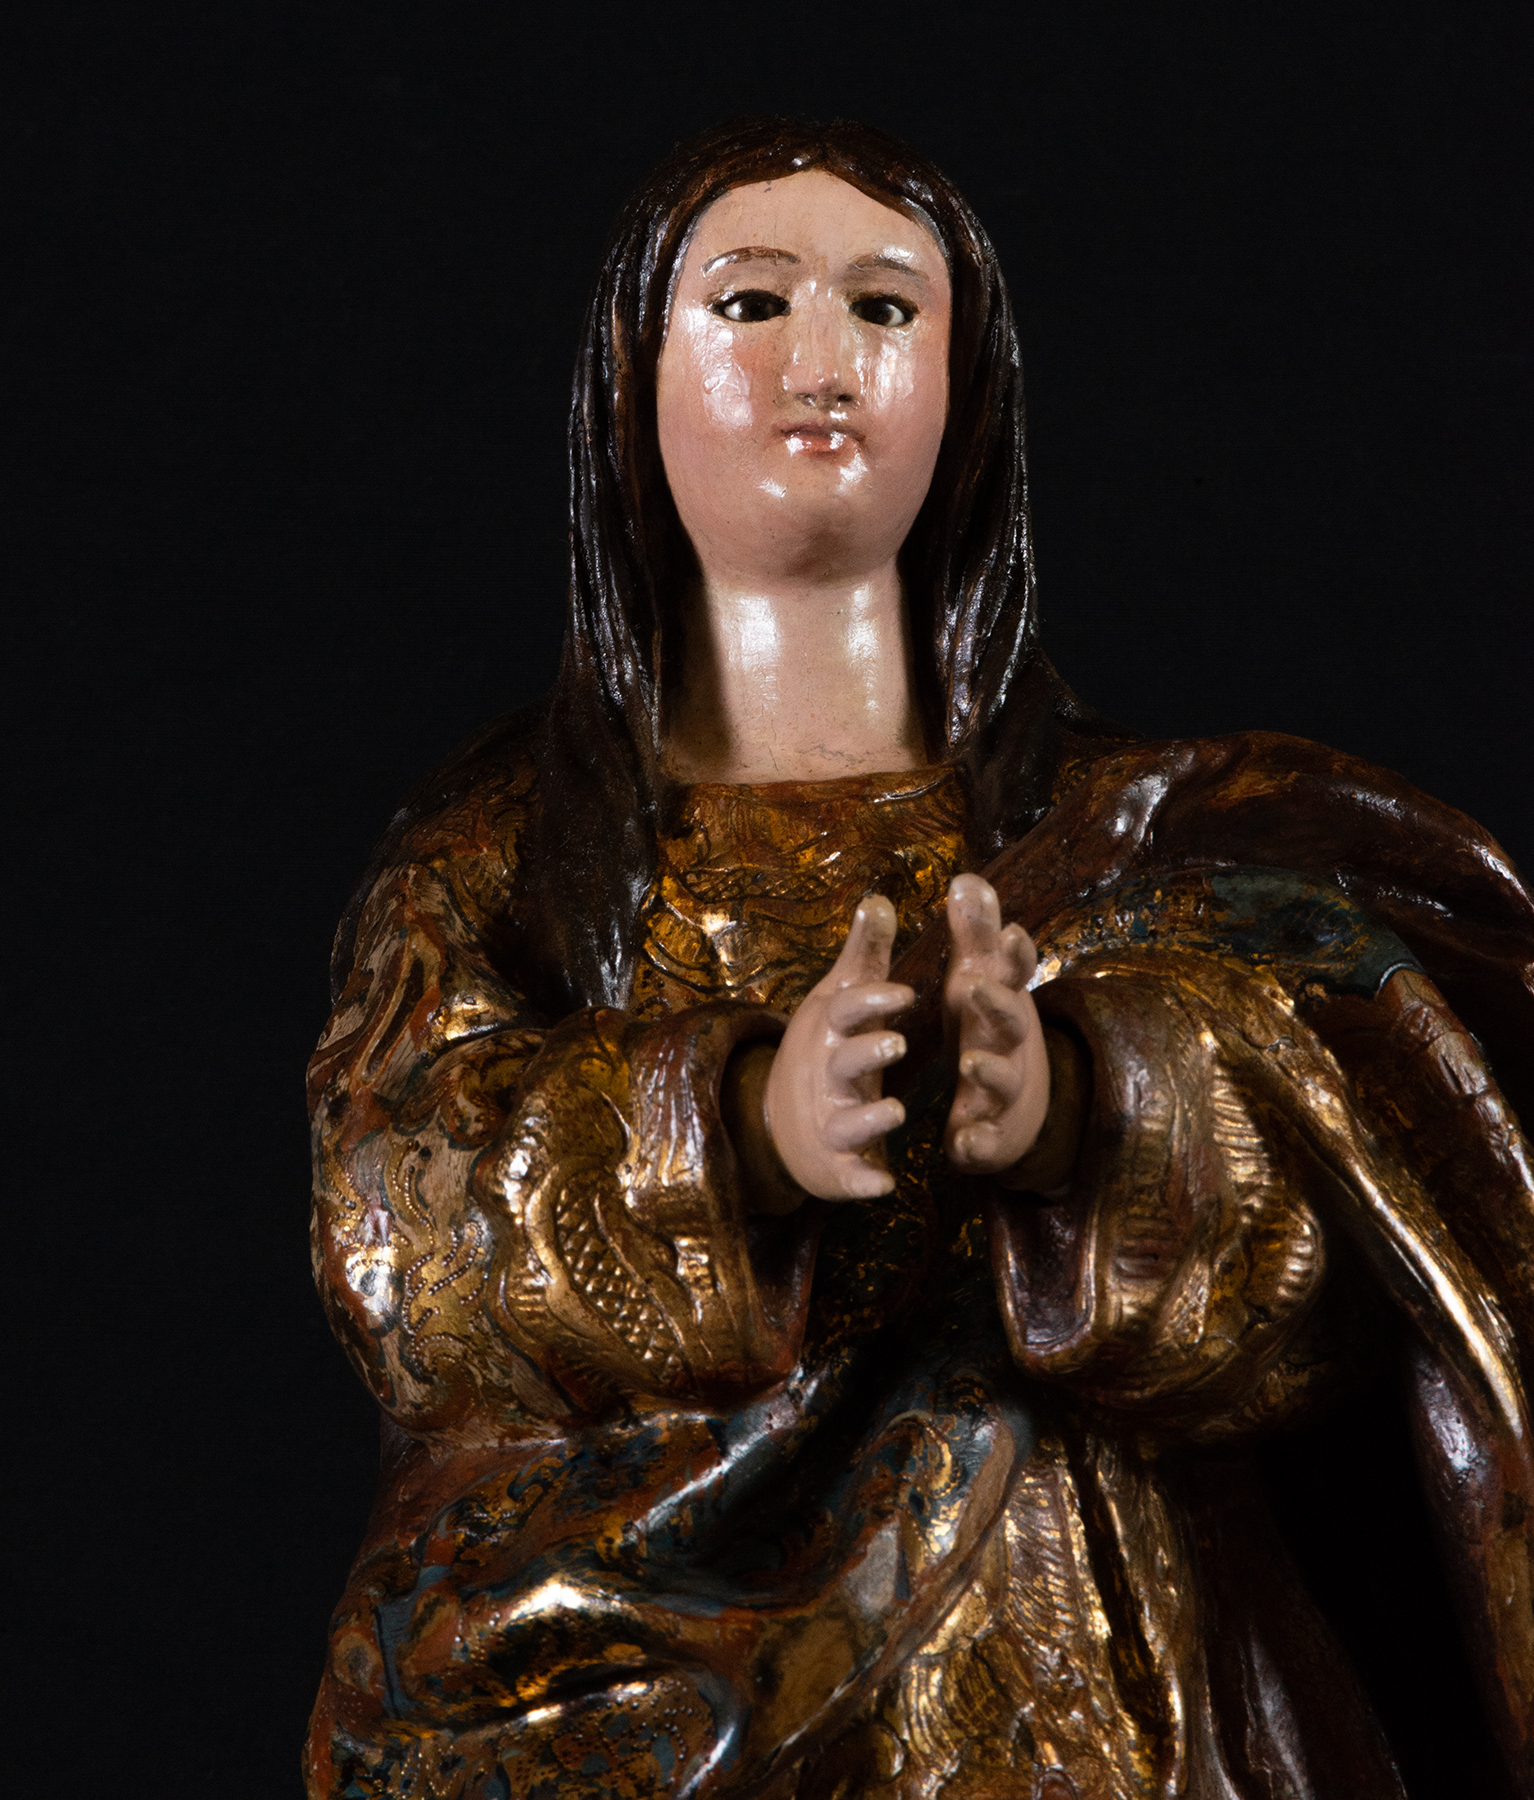 Immaculate Virgin of New Spain, 17th century Mexican colonial work, possibly Puebla - Image 2 of 6